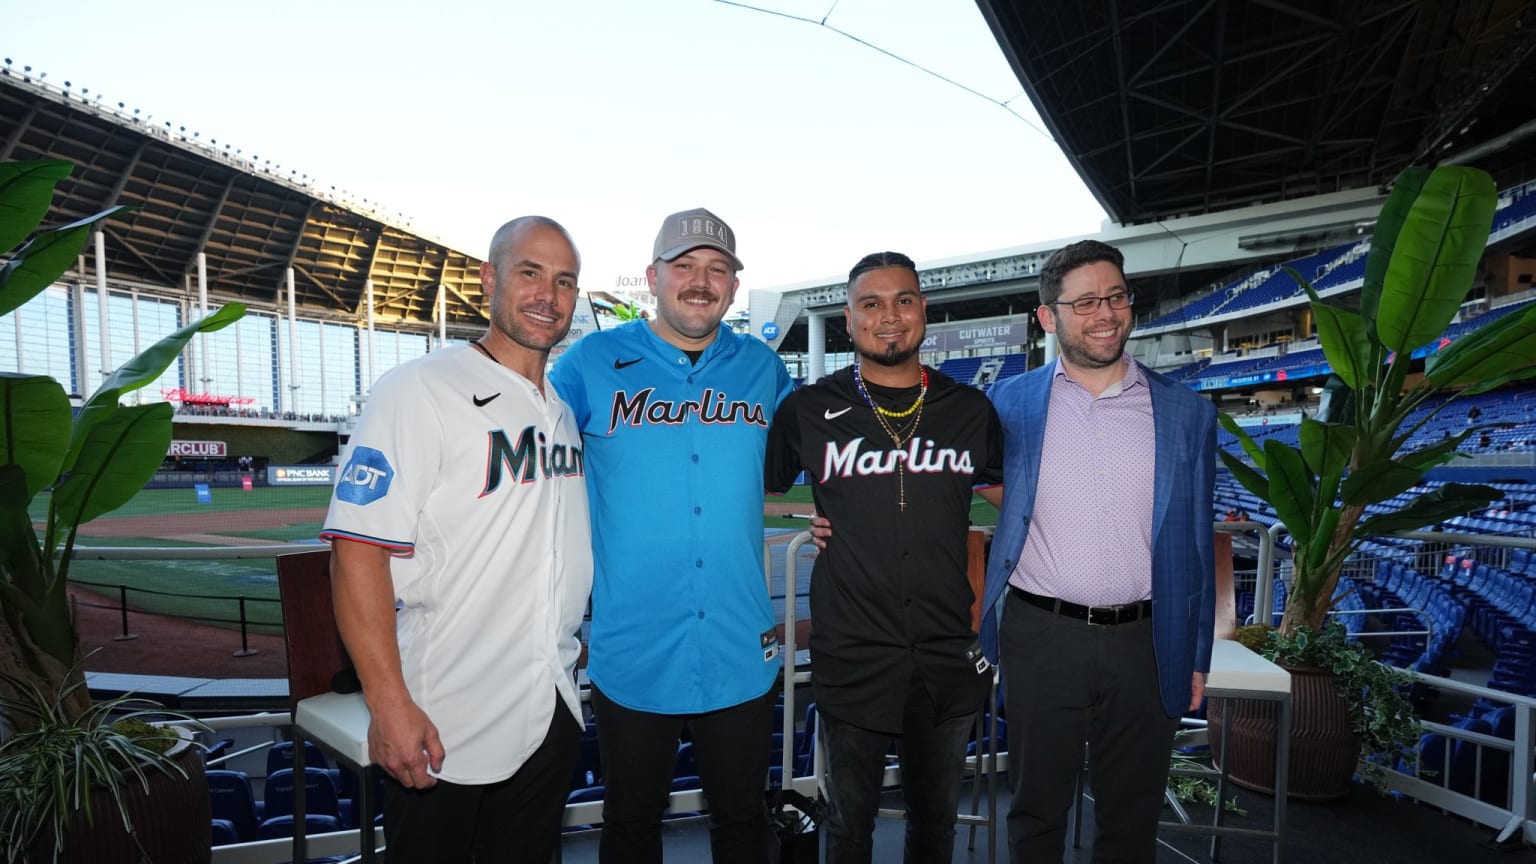 Marlins players in new jerseys